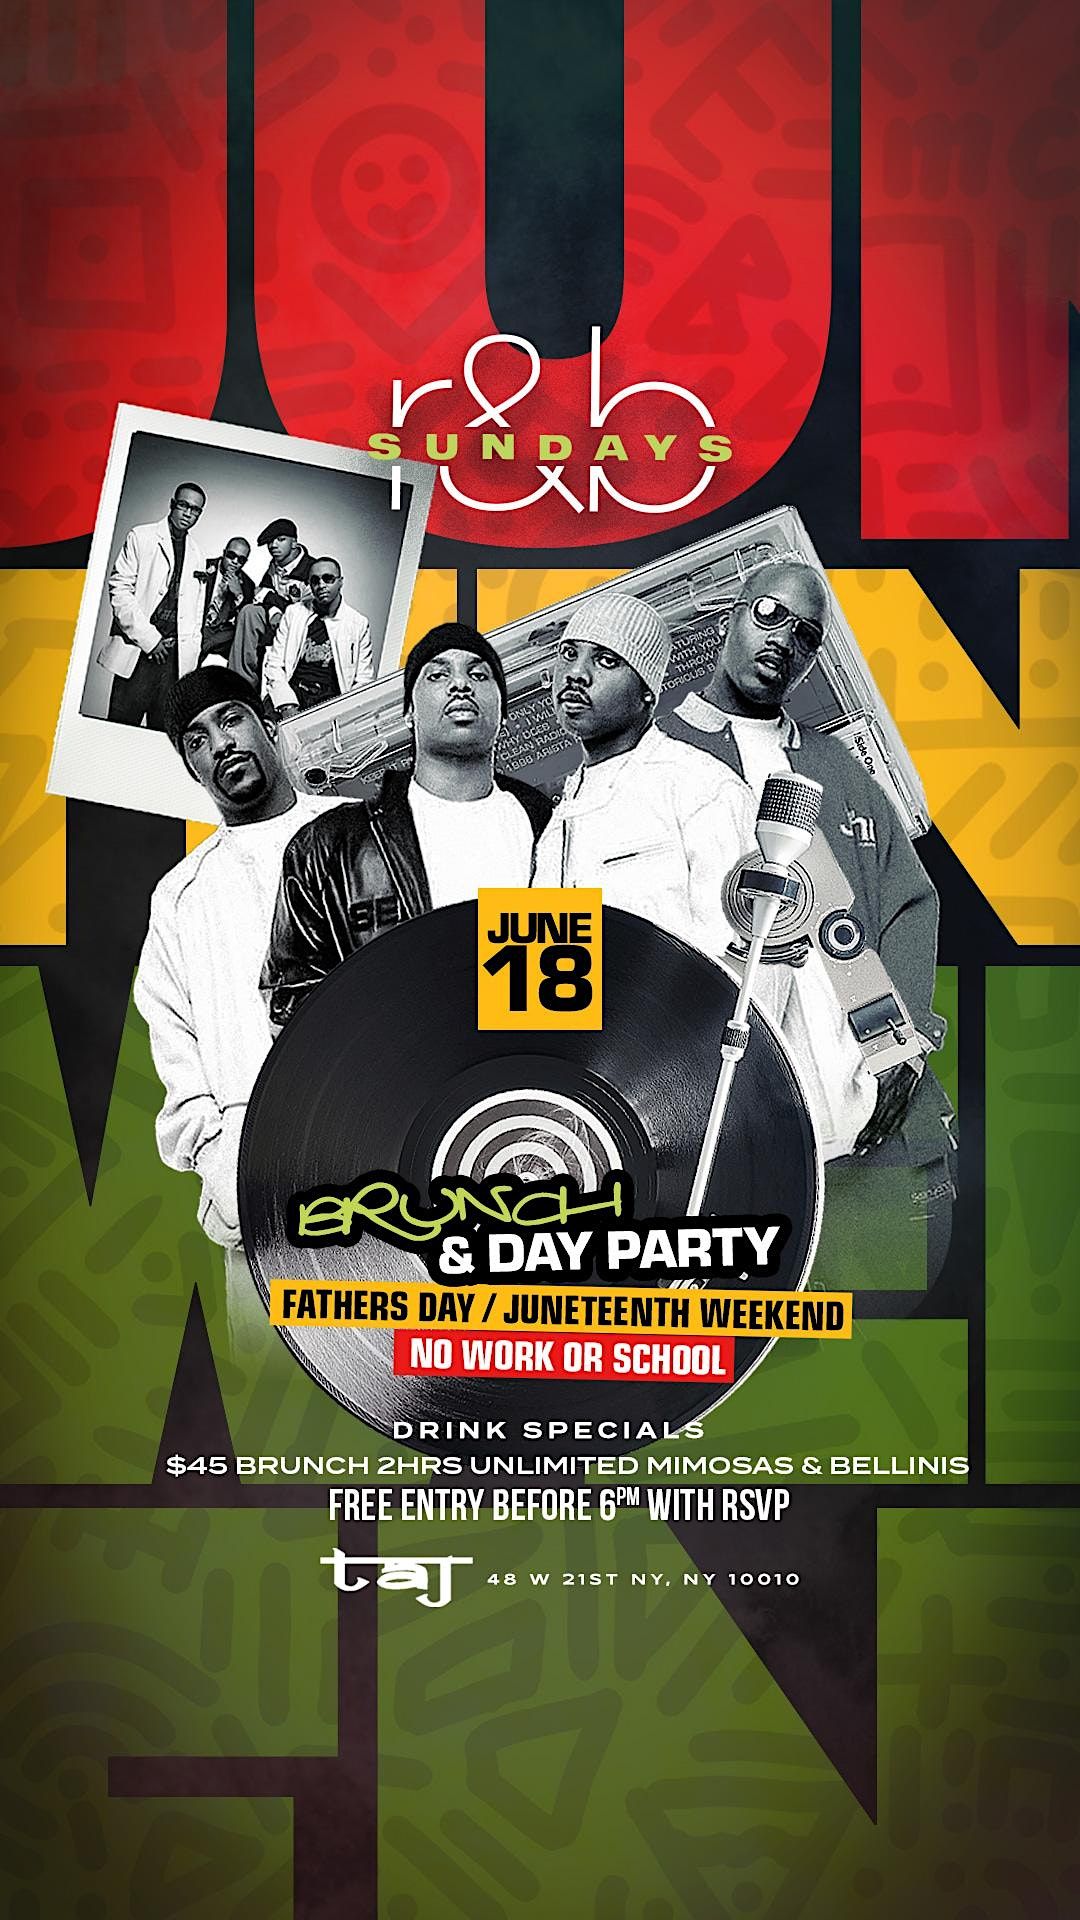 Juneteenth & Fathers Day  Edition of R&B Sundays (Brunch & Day Party)